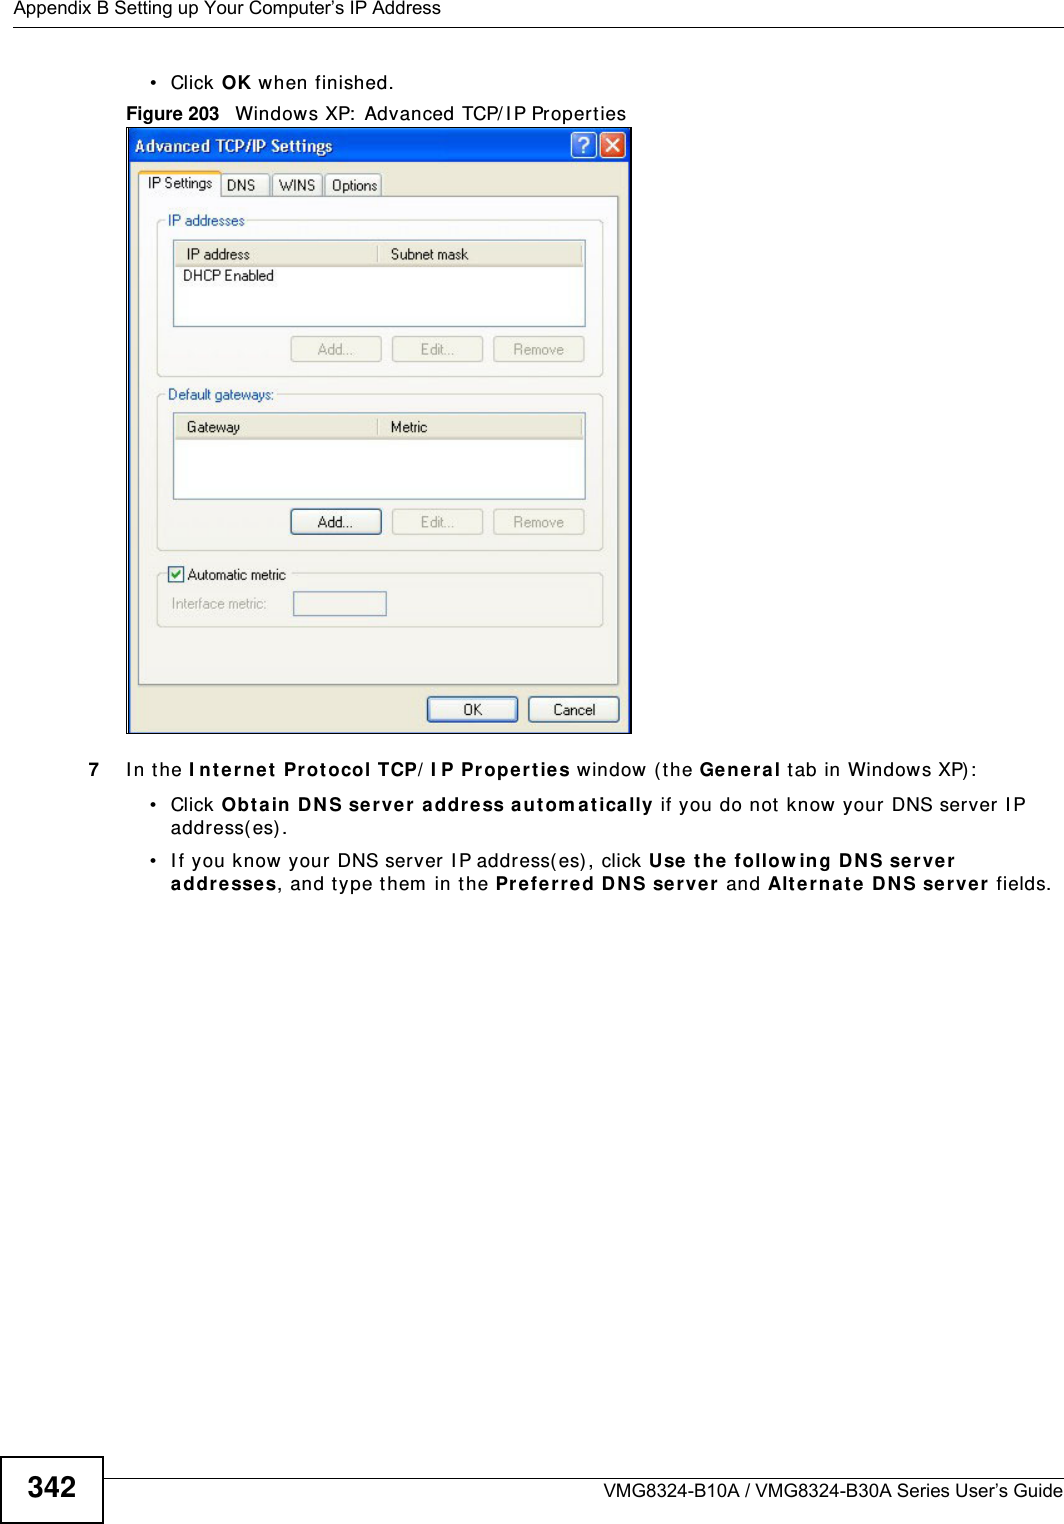 Appendix B Setting up Your Computer’s IP AddressVMG8324-B10A / VMG8324-B30A Series User’s Guide342• Click OK when finished.Figure 203   Windows XP:  Advanced TCP/ I P Properties7I n t he I nt e rne t  Prot ocol TCP/ I P Pr ope r ties window ( the Gen era l t ab in Windows XP) :• Click Obt ain D NS se rver addre ss aut om at ically if you do not know your DNS server I P address( es) .• I f you know your DNS server I P address( es) , click Use the  follow ing D NS se rver addre sse s, and t ype them  in t he Pre ferr ed D NS se rver  and Alte rna te DN S ser ver  fields. 